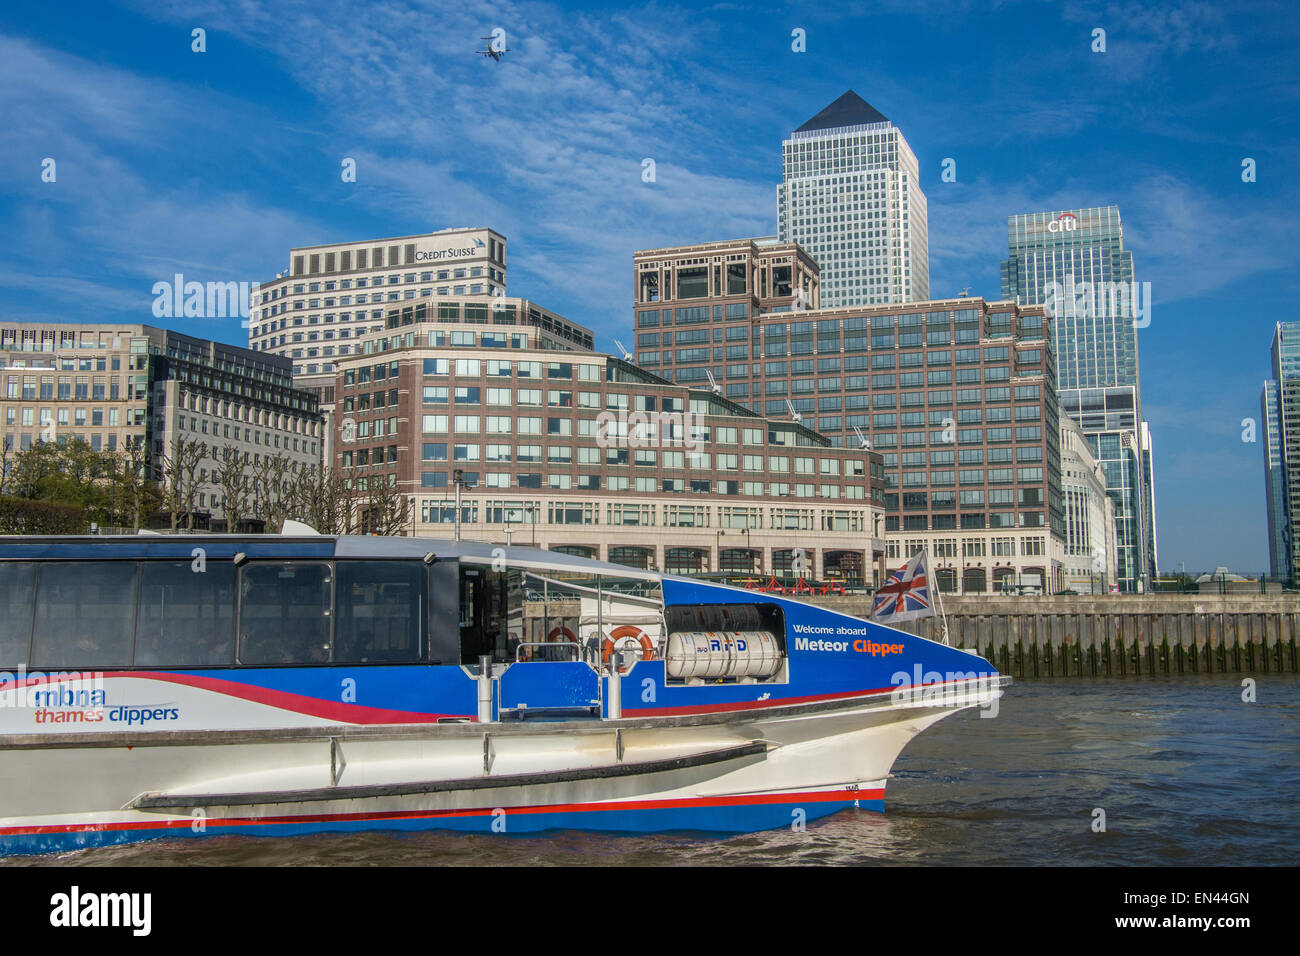 River boat on the River Thames, London. Stock Photo